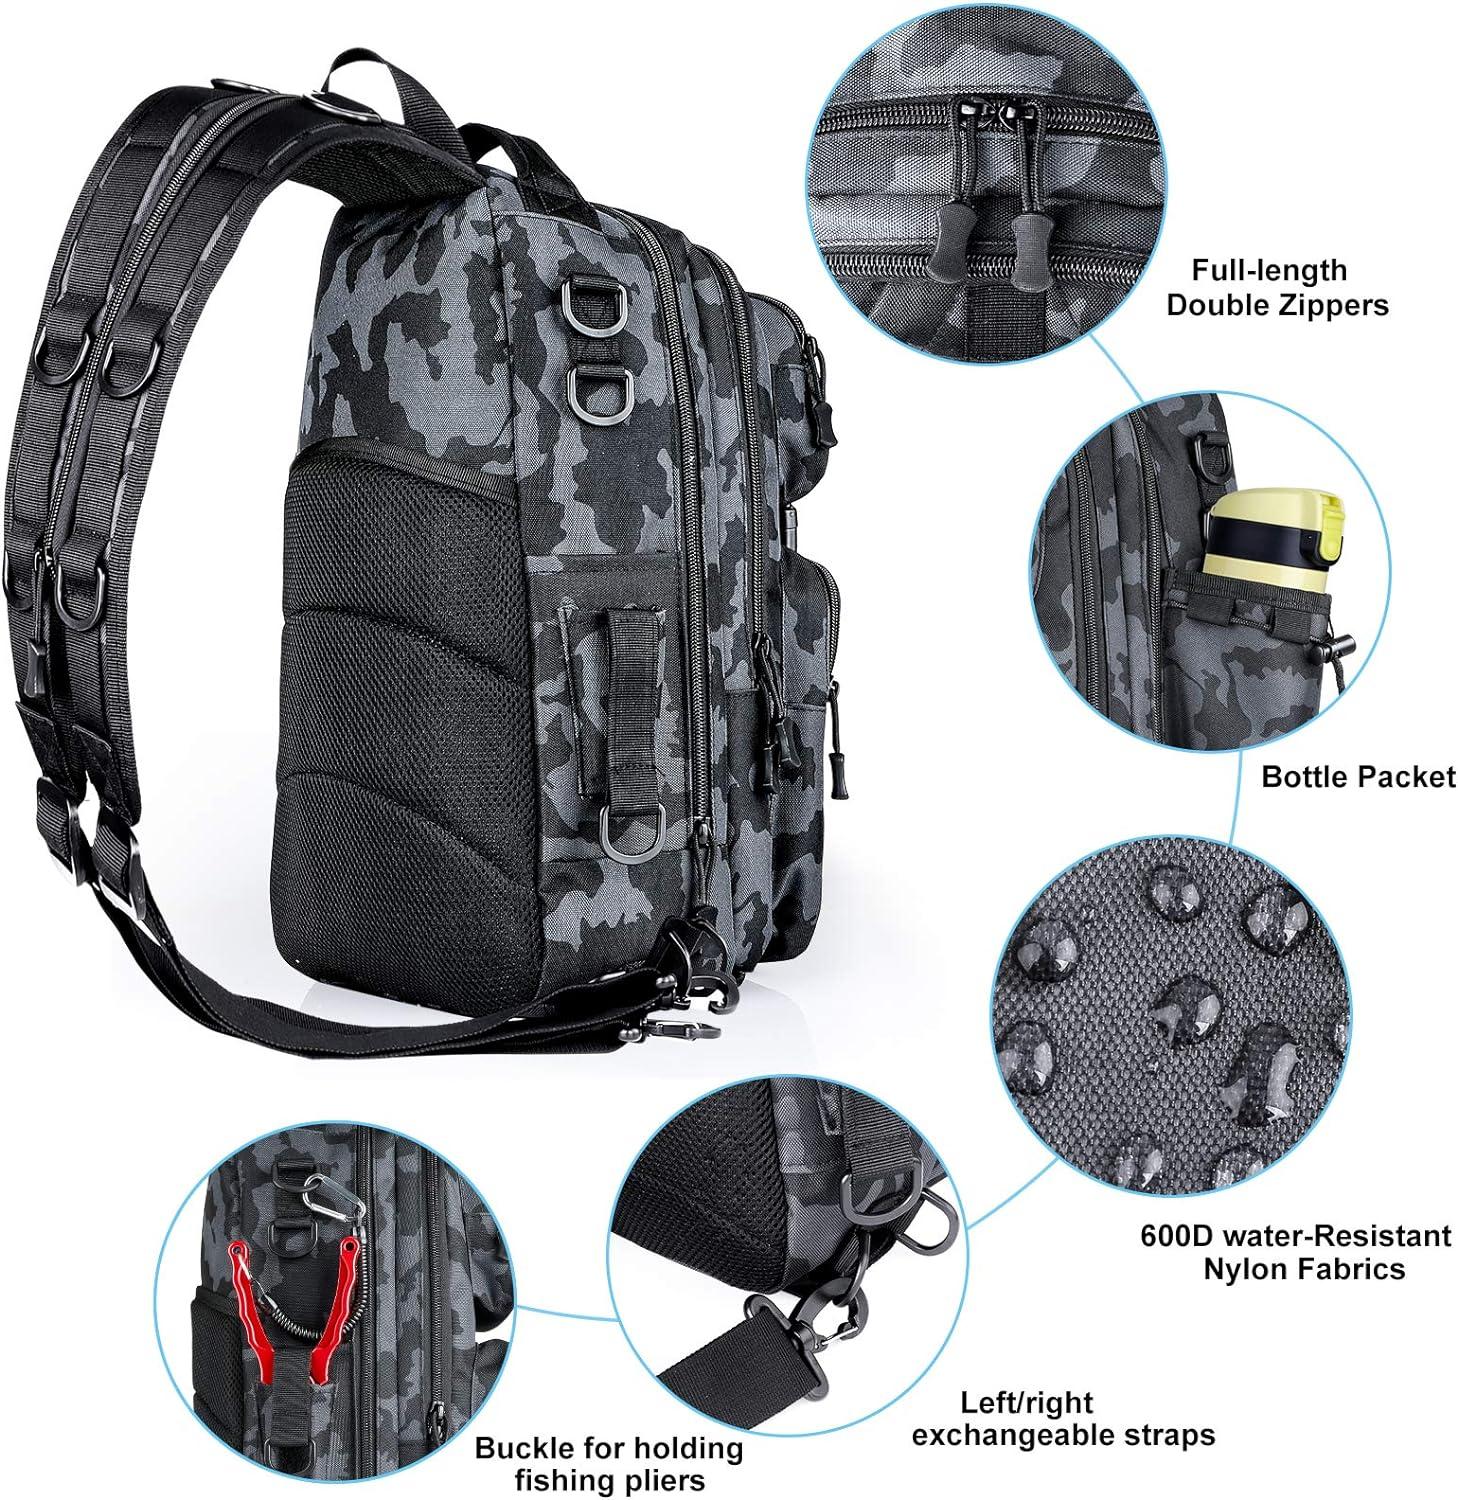 PLUSINNO Fishing Backpack Tackle Bag Water-Resistant Fishing Backpack with  Rod Holder Large Fishing Bag for Fishing Gear Ideal Fishing Gifts for Men  Large(16.5*10.5*5.5inch)-Black Camo